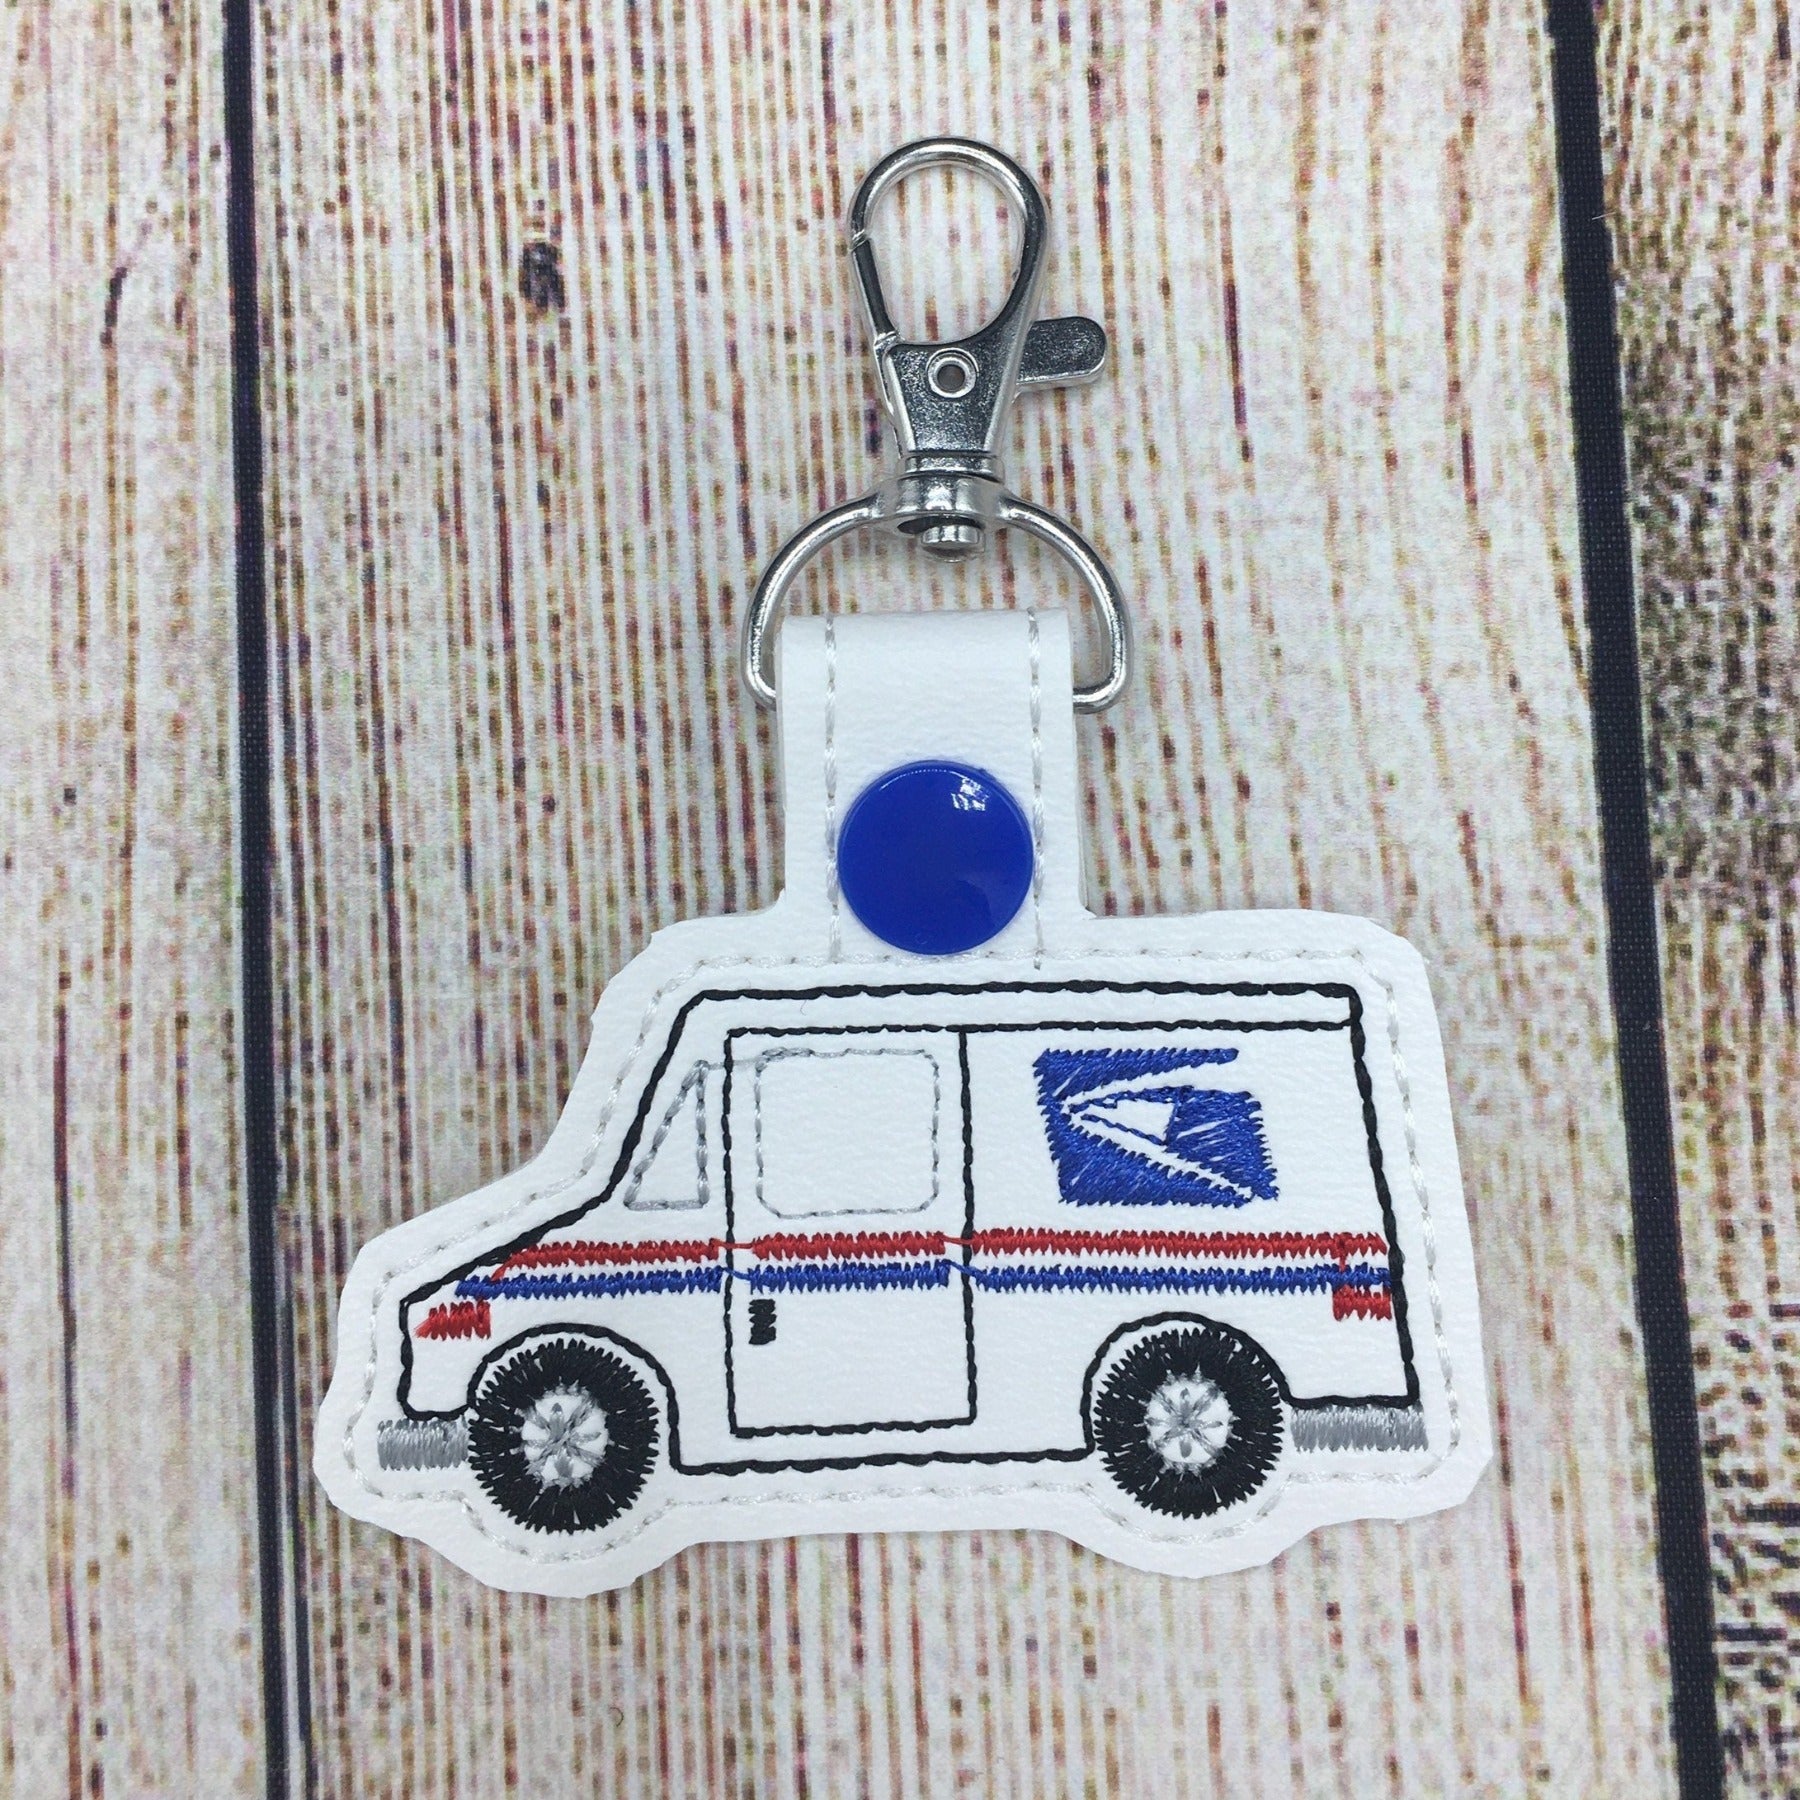 USPS mail truck keychain with lobster clasp